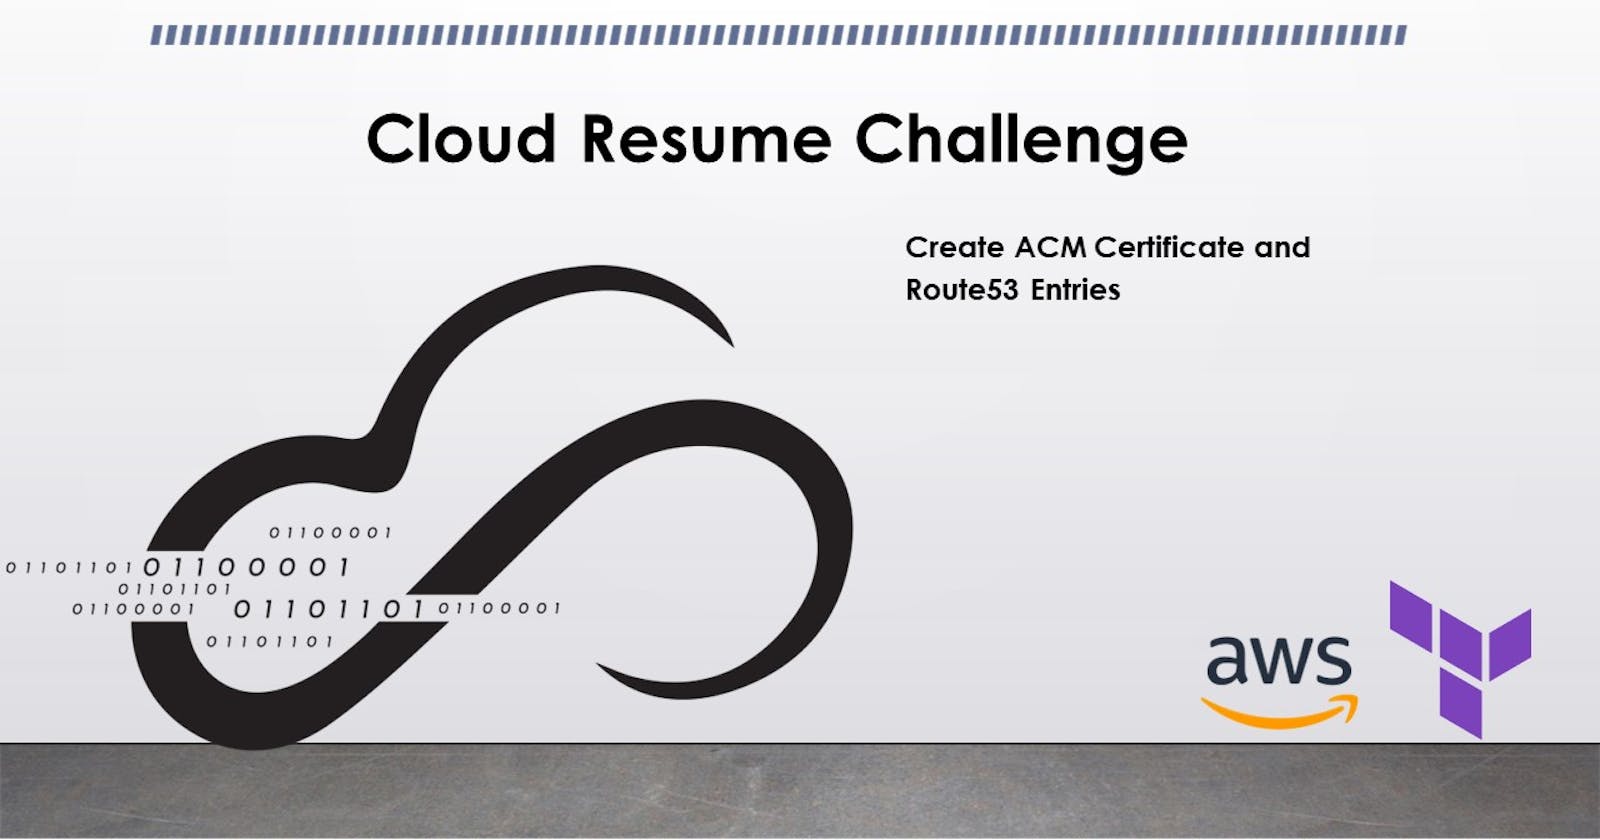 11. Cloud Resume Challenge: Configuring Amazon Certificate Manager (ACM) Certificate and Route53 Entries